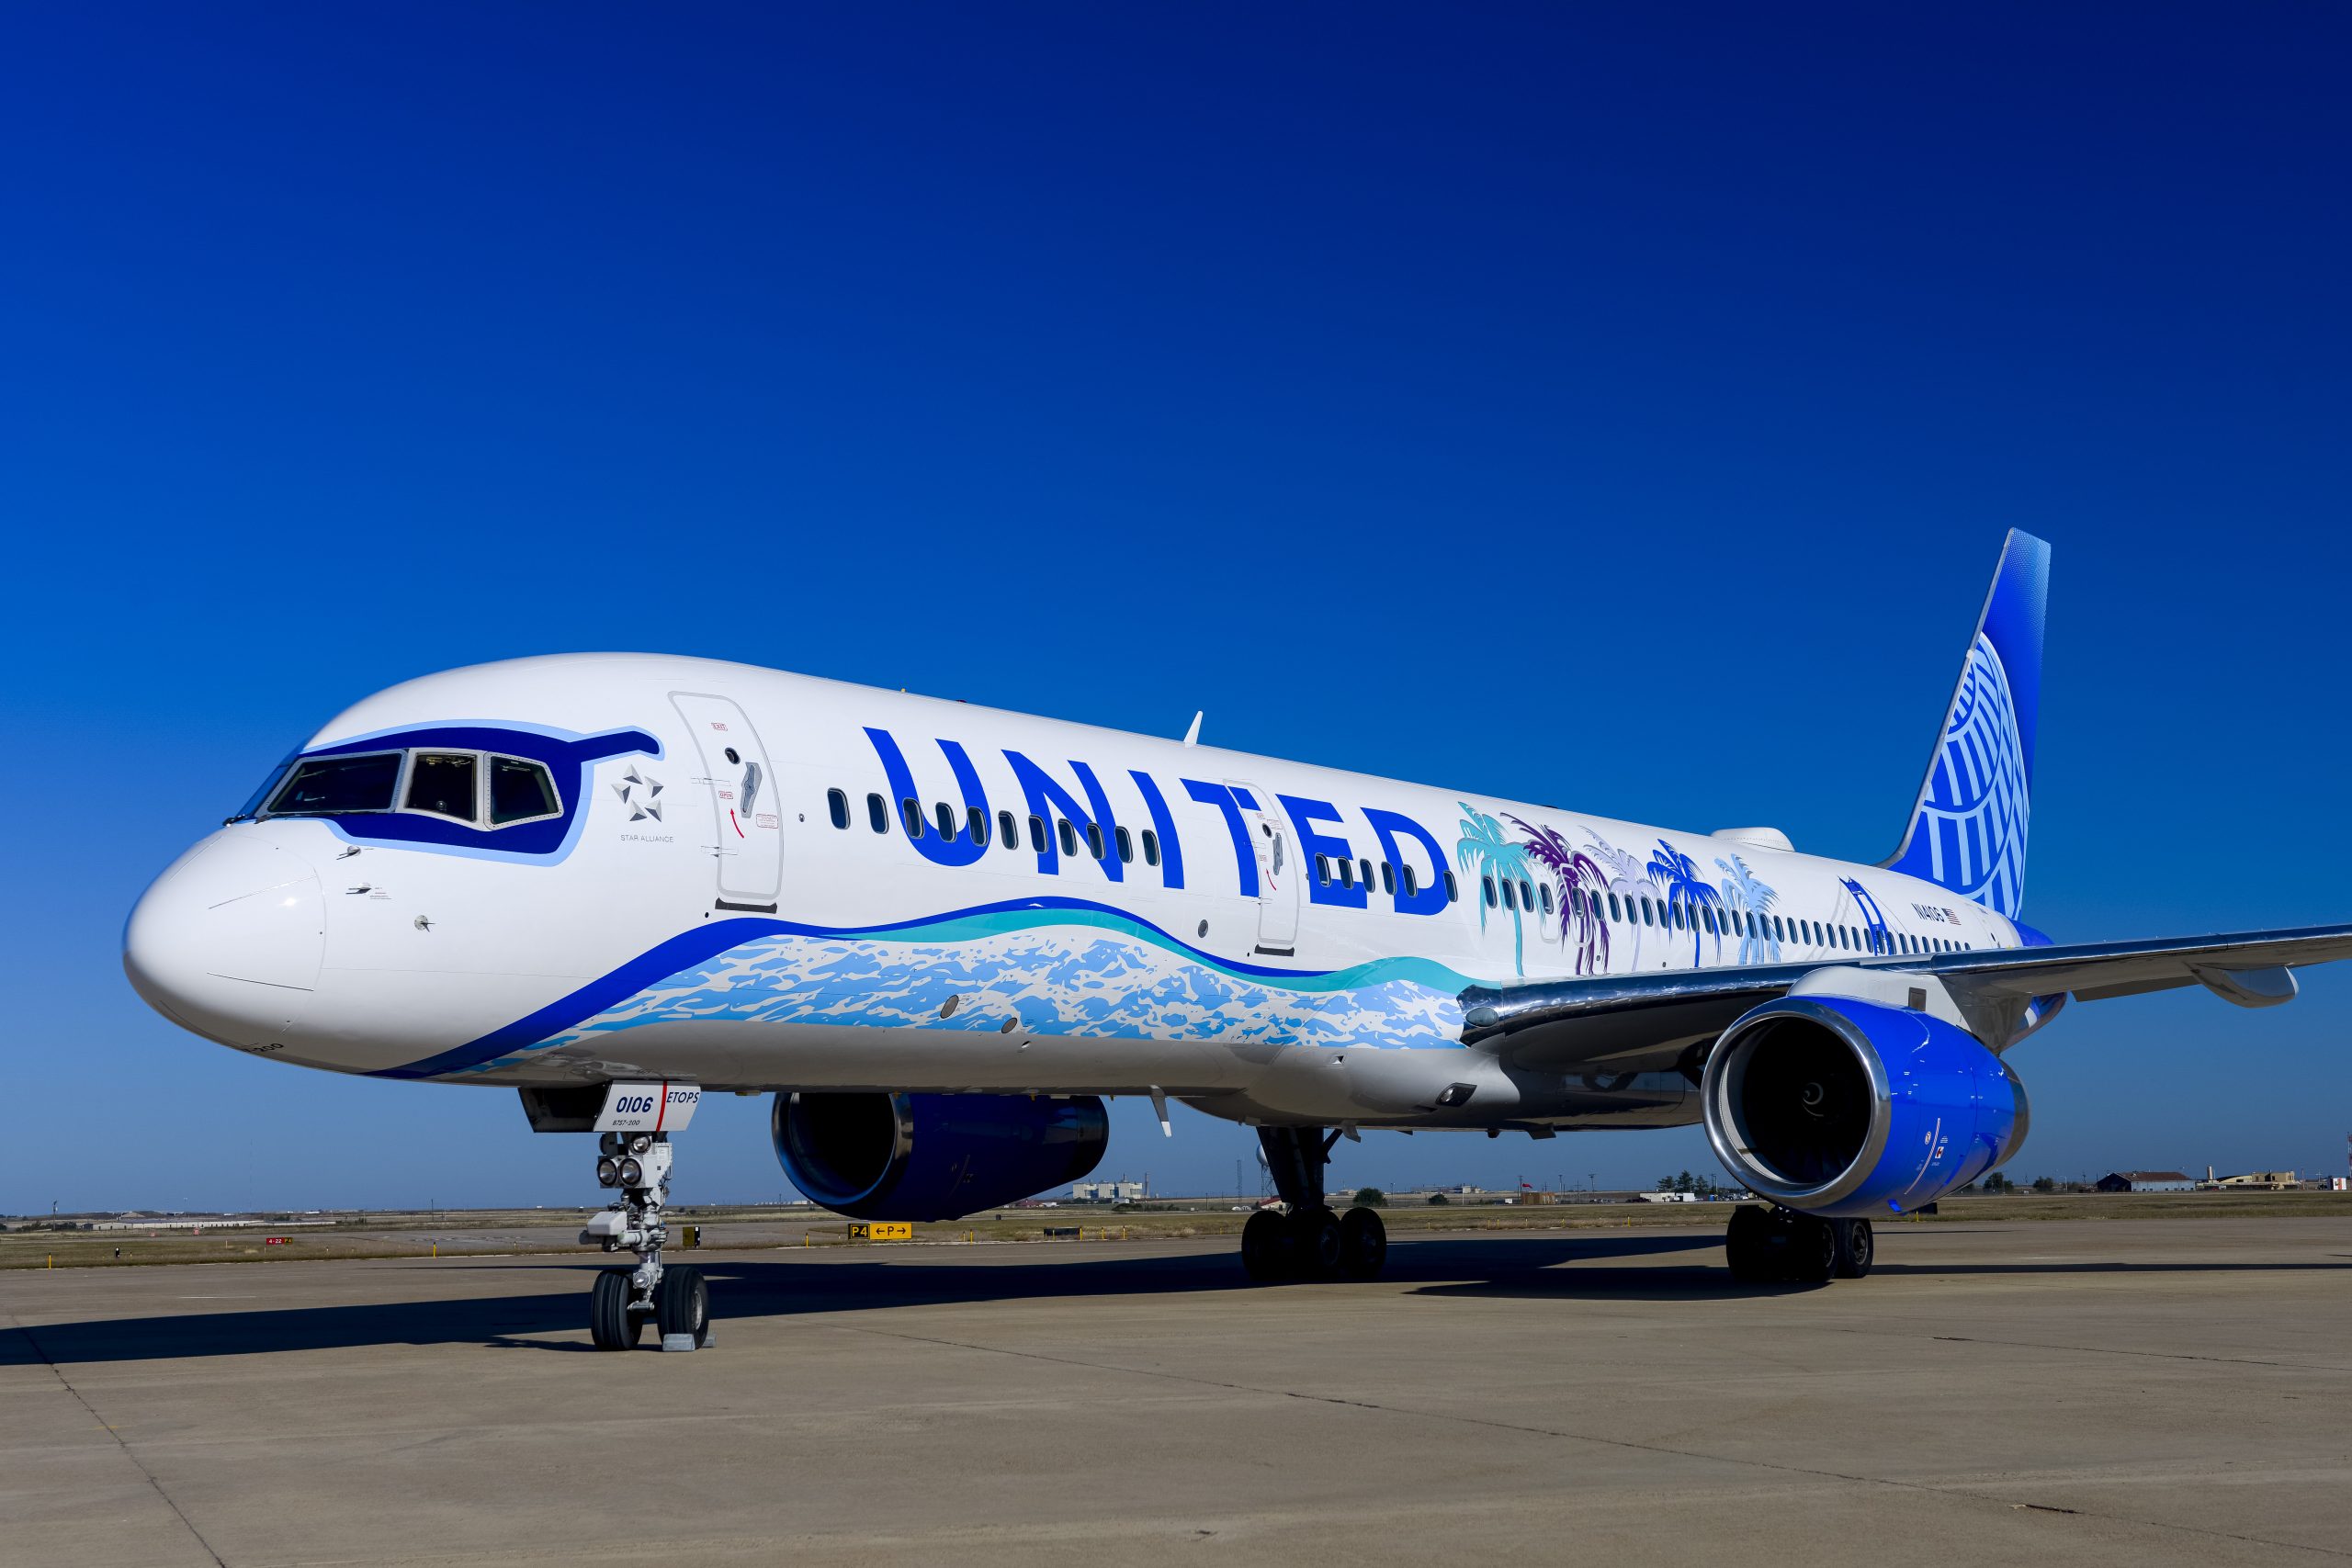 Boeing 757 design, created by San Francisco resident and artist Tsungwei Moo